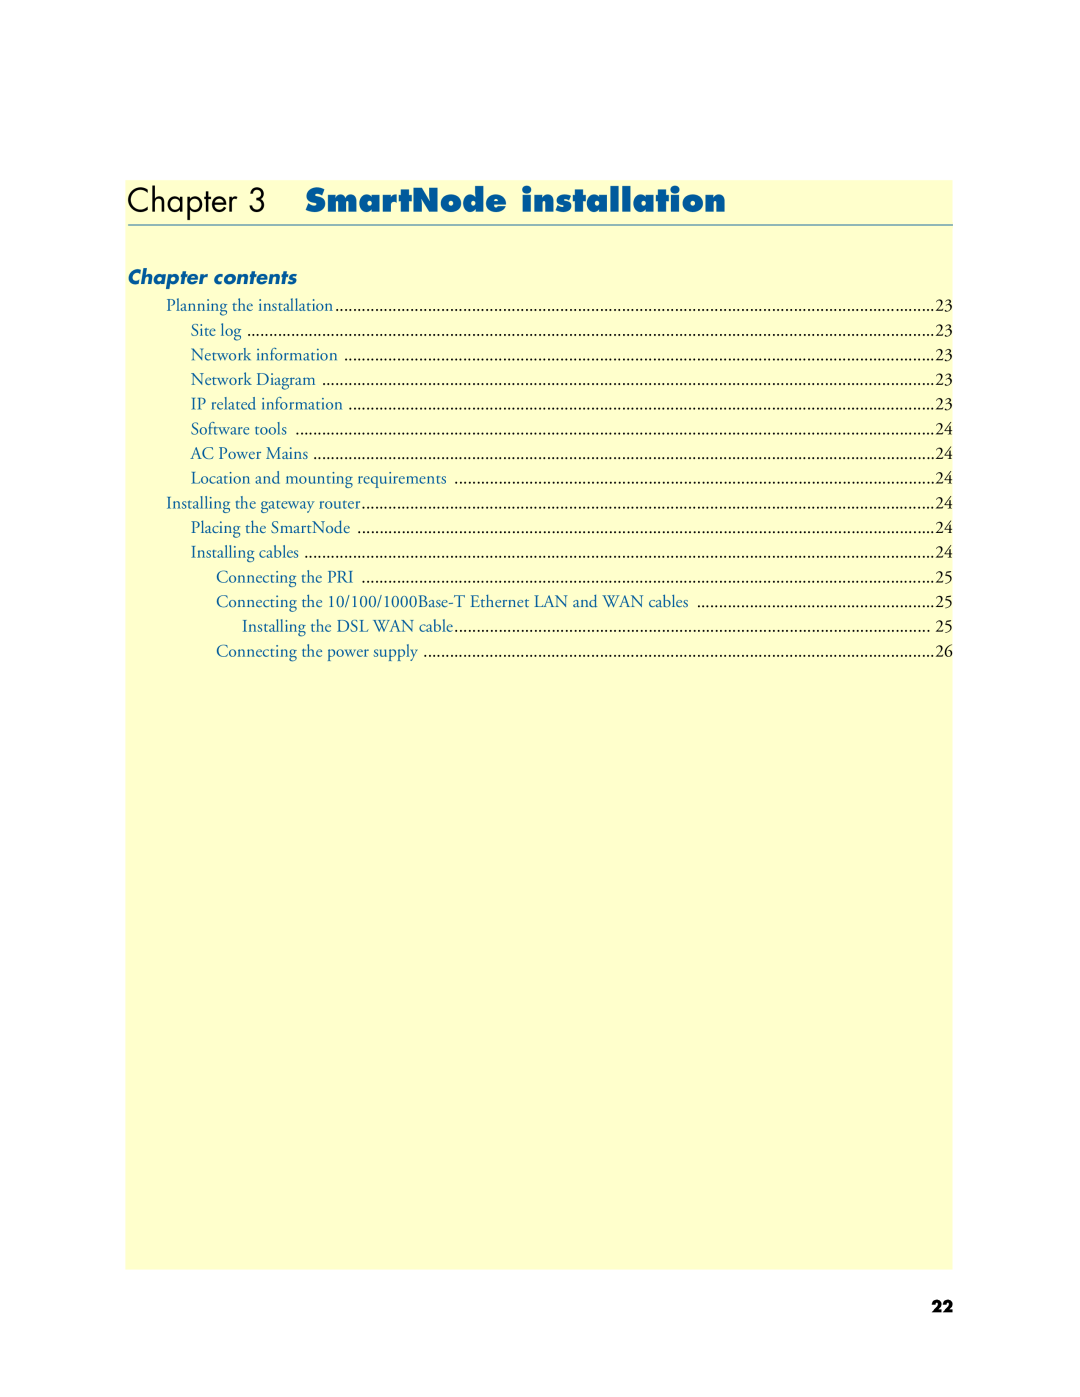 Patton electronic 4950-NCE manual SmartNode installation, Chapter contents 